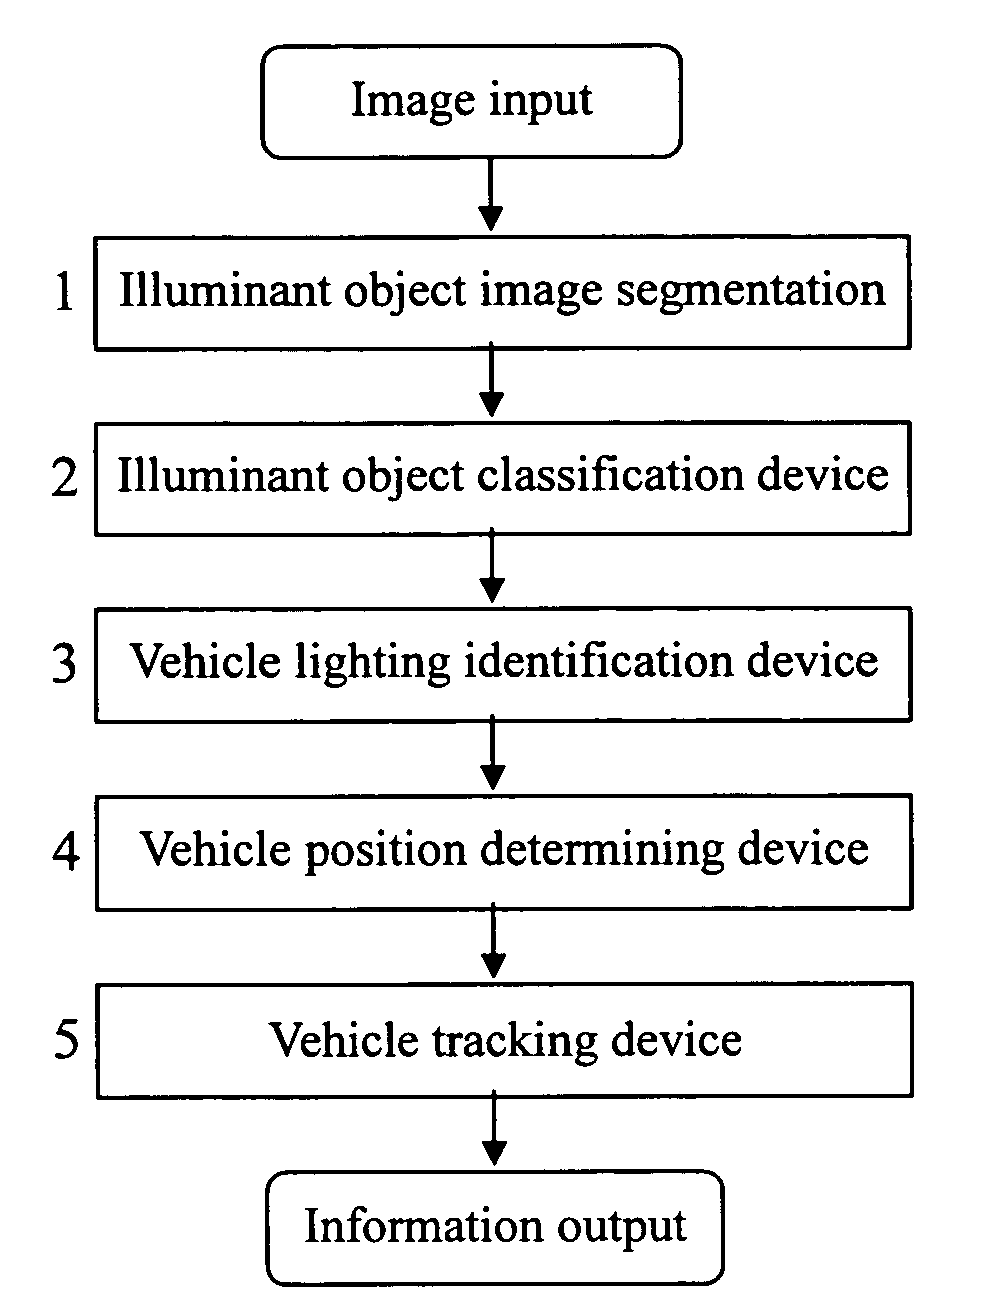 Real-time nighttime vehicle detection and recognition system based on computer vision